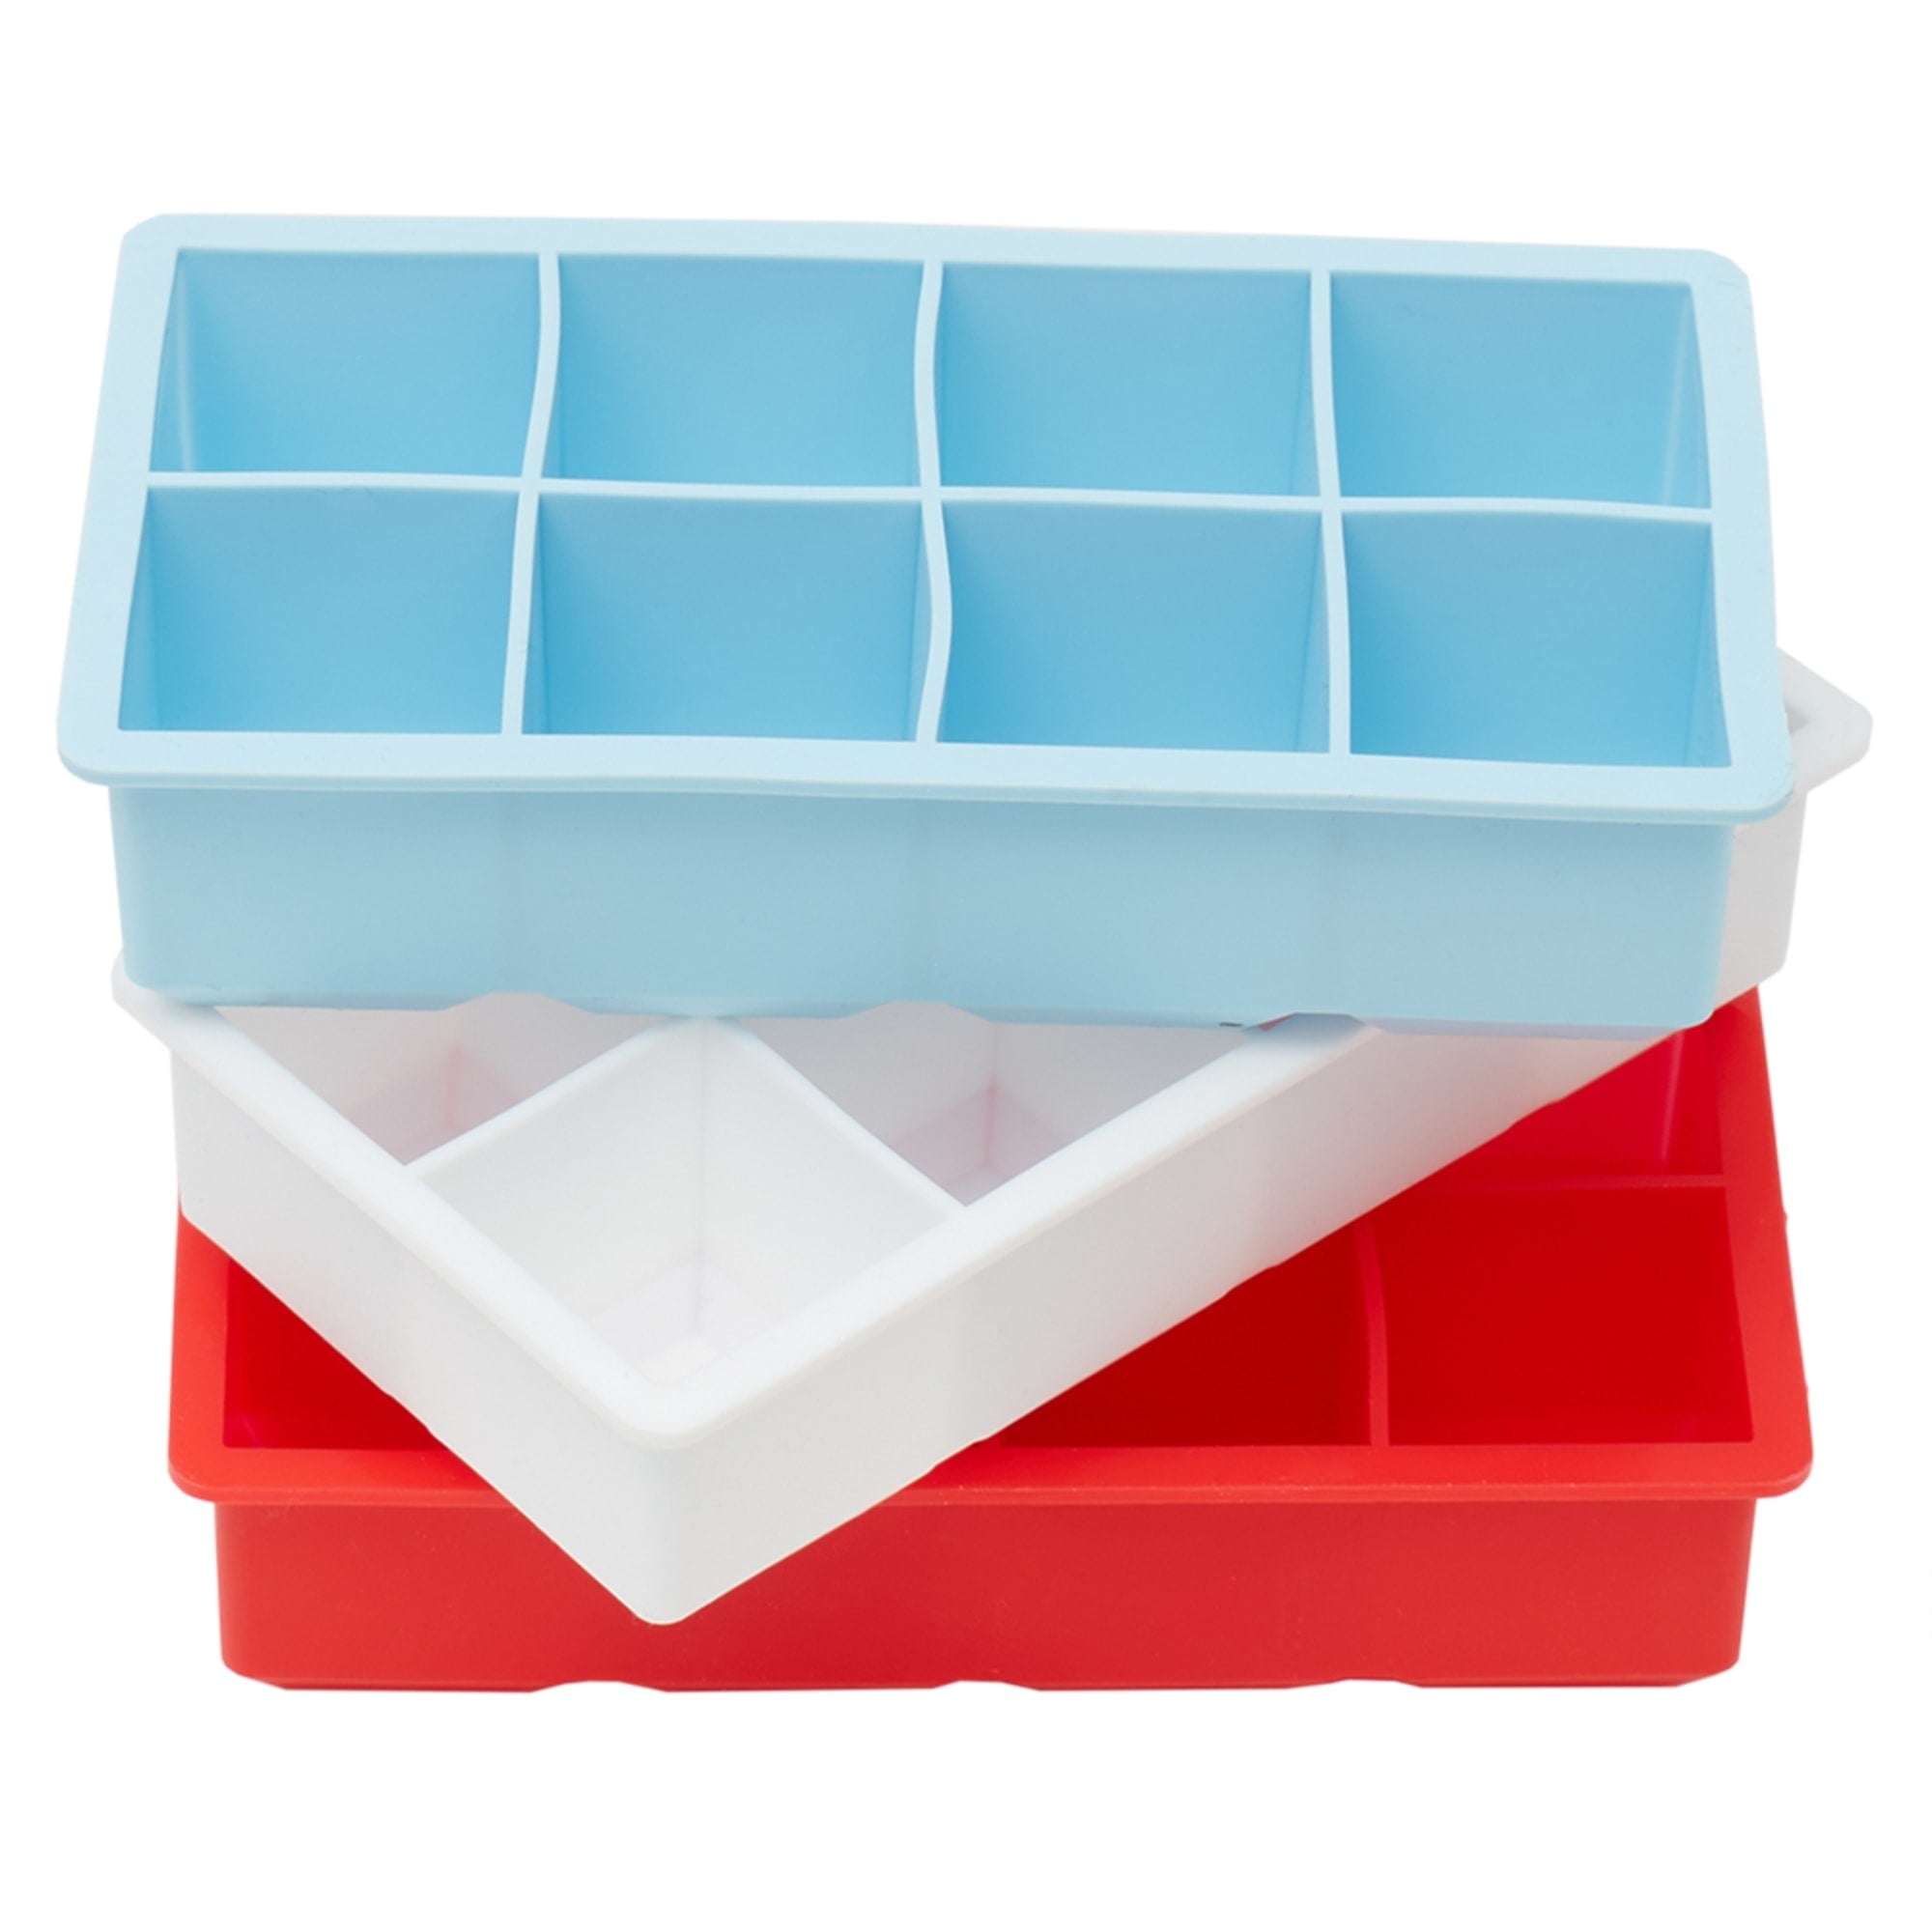 Home Basics Jumbo Silicone Ice Cube Tray $4.00 EACH, CASE PACK OF 24